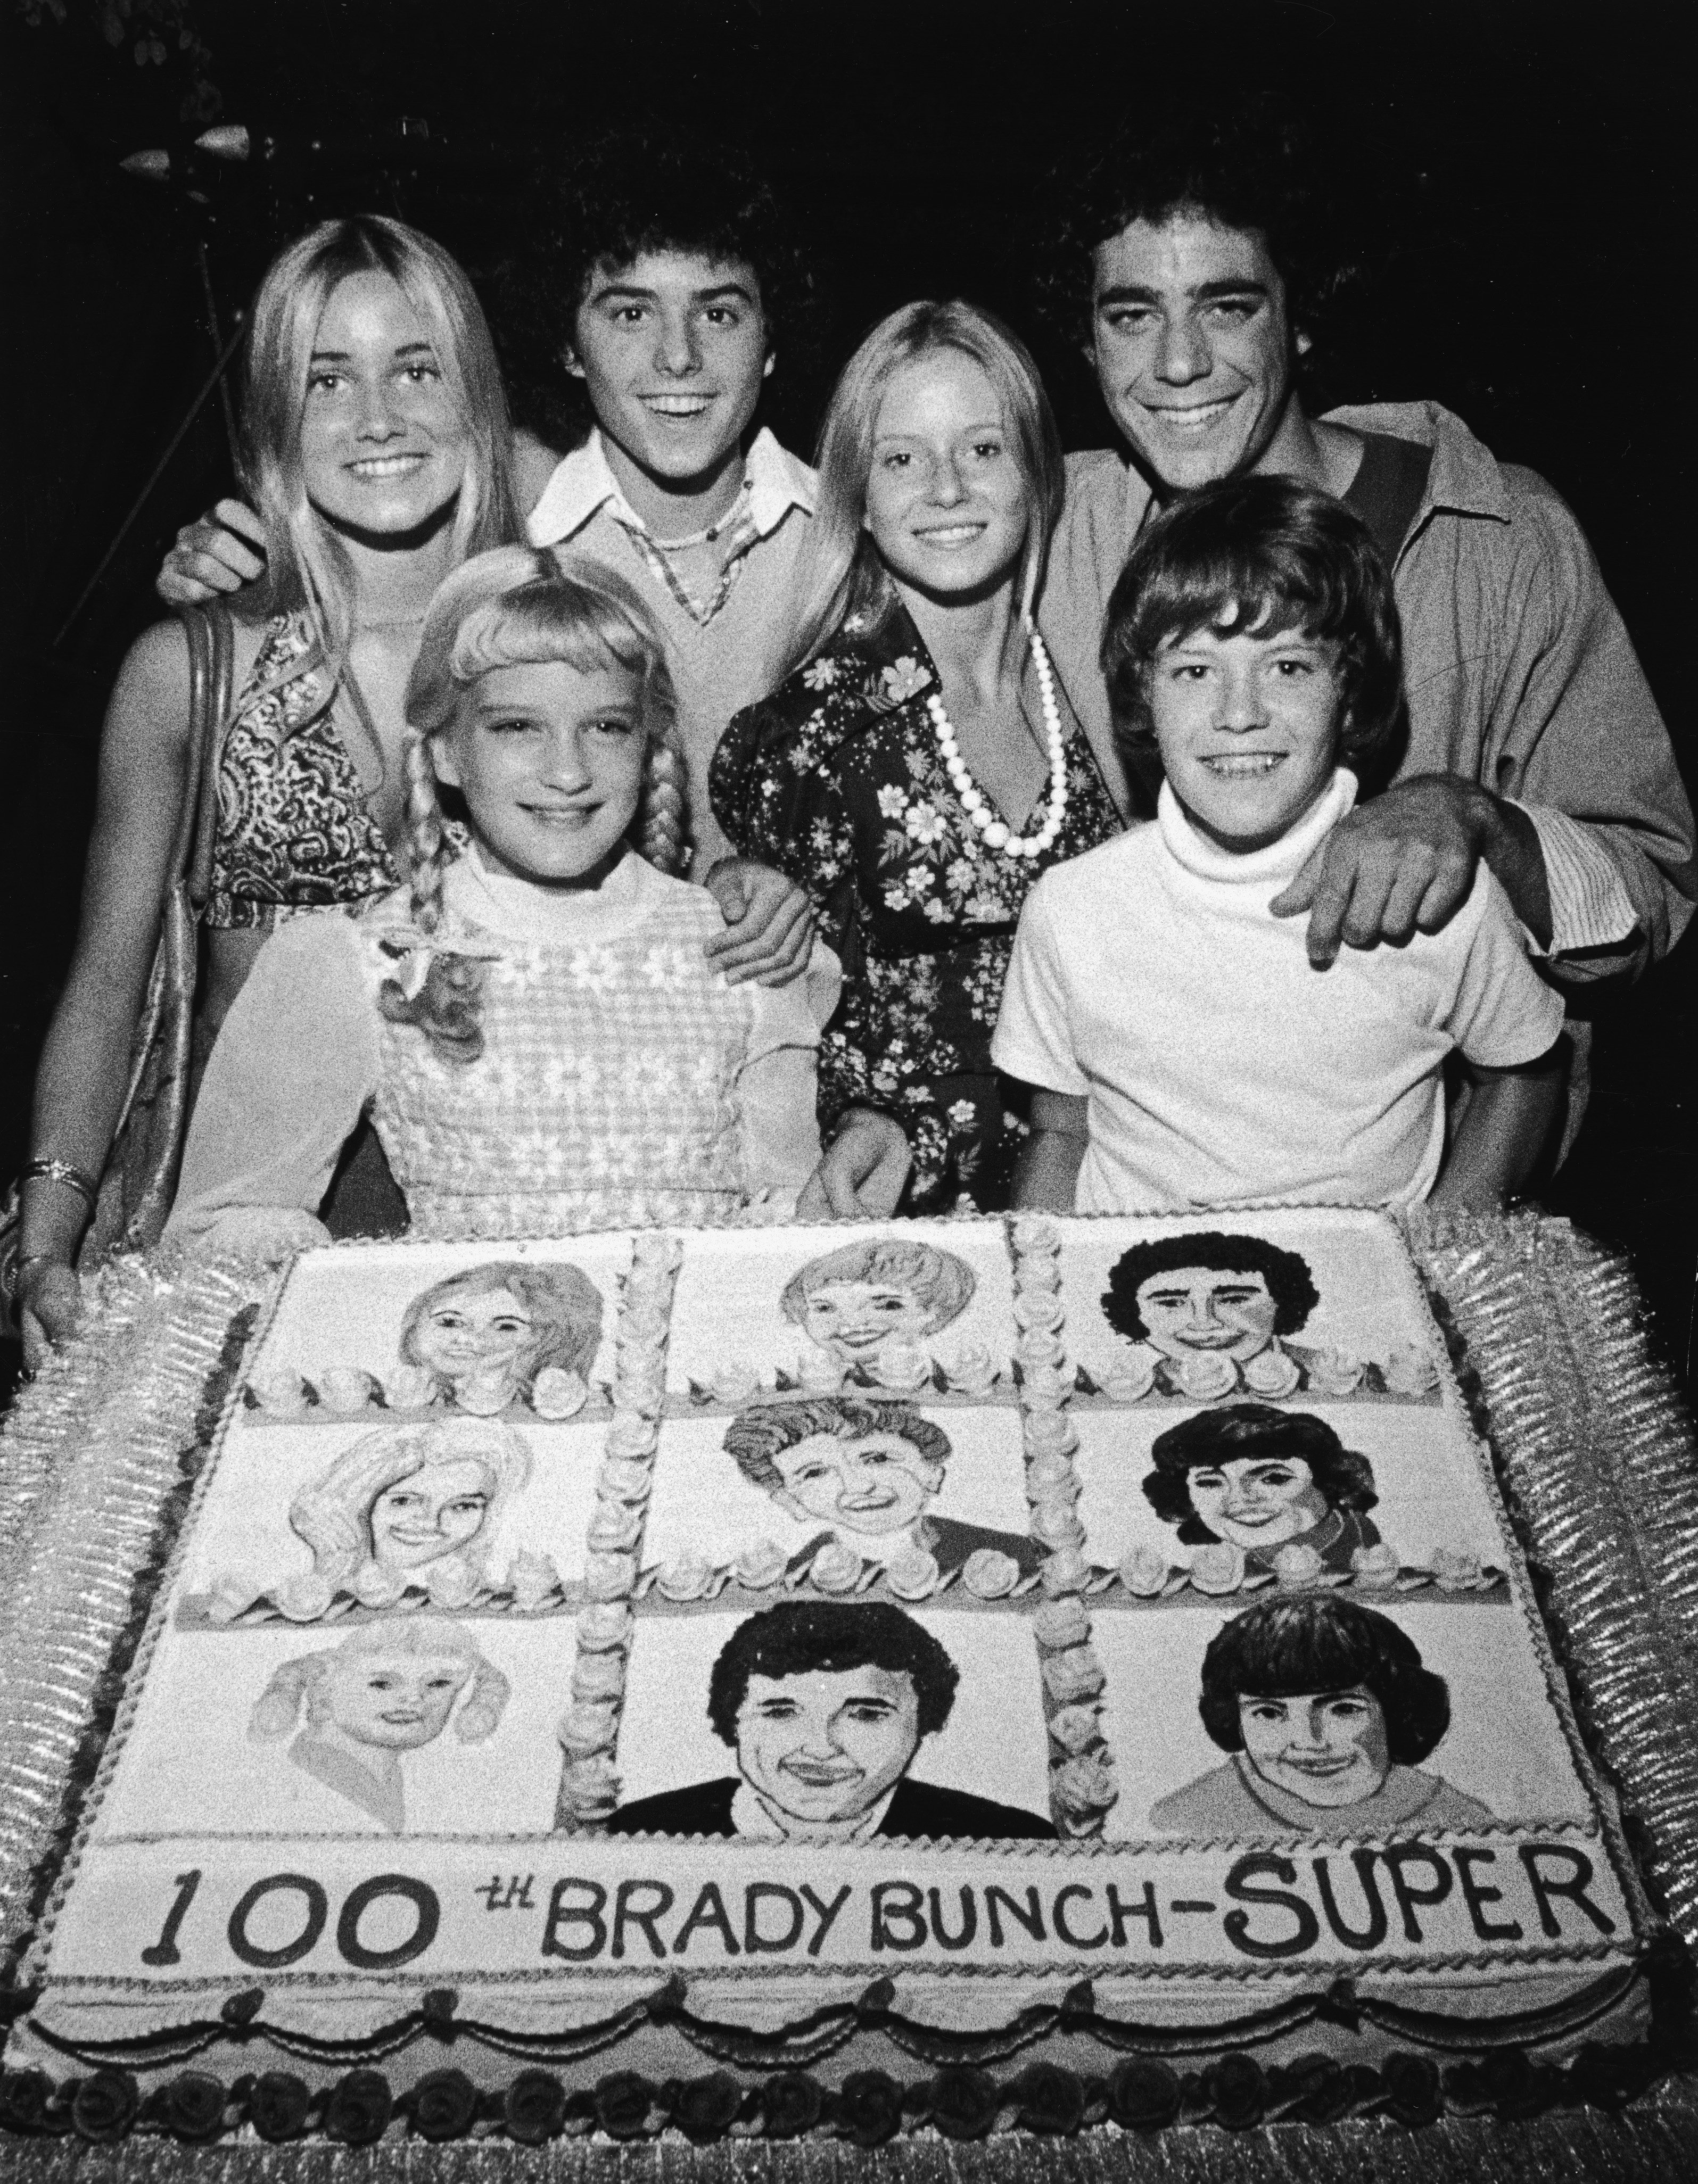 Maureen McCormick, Susan Olsen, Christopher Knight, Eve Plumb, Barry Williams and Mike Lookinland pose with a cake in celebration of "The Brady Bunch's" 100th episode | Photo: Getty Images